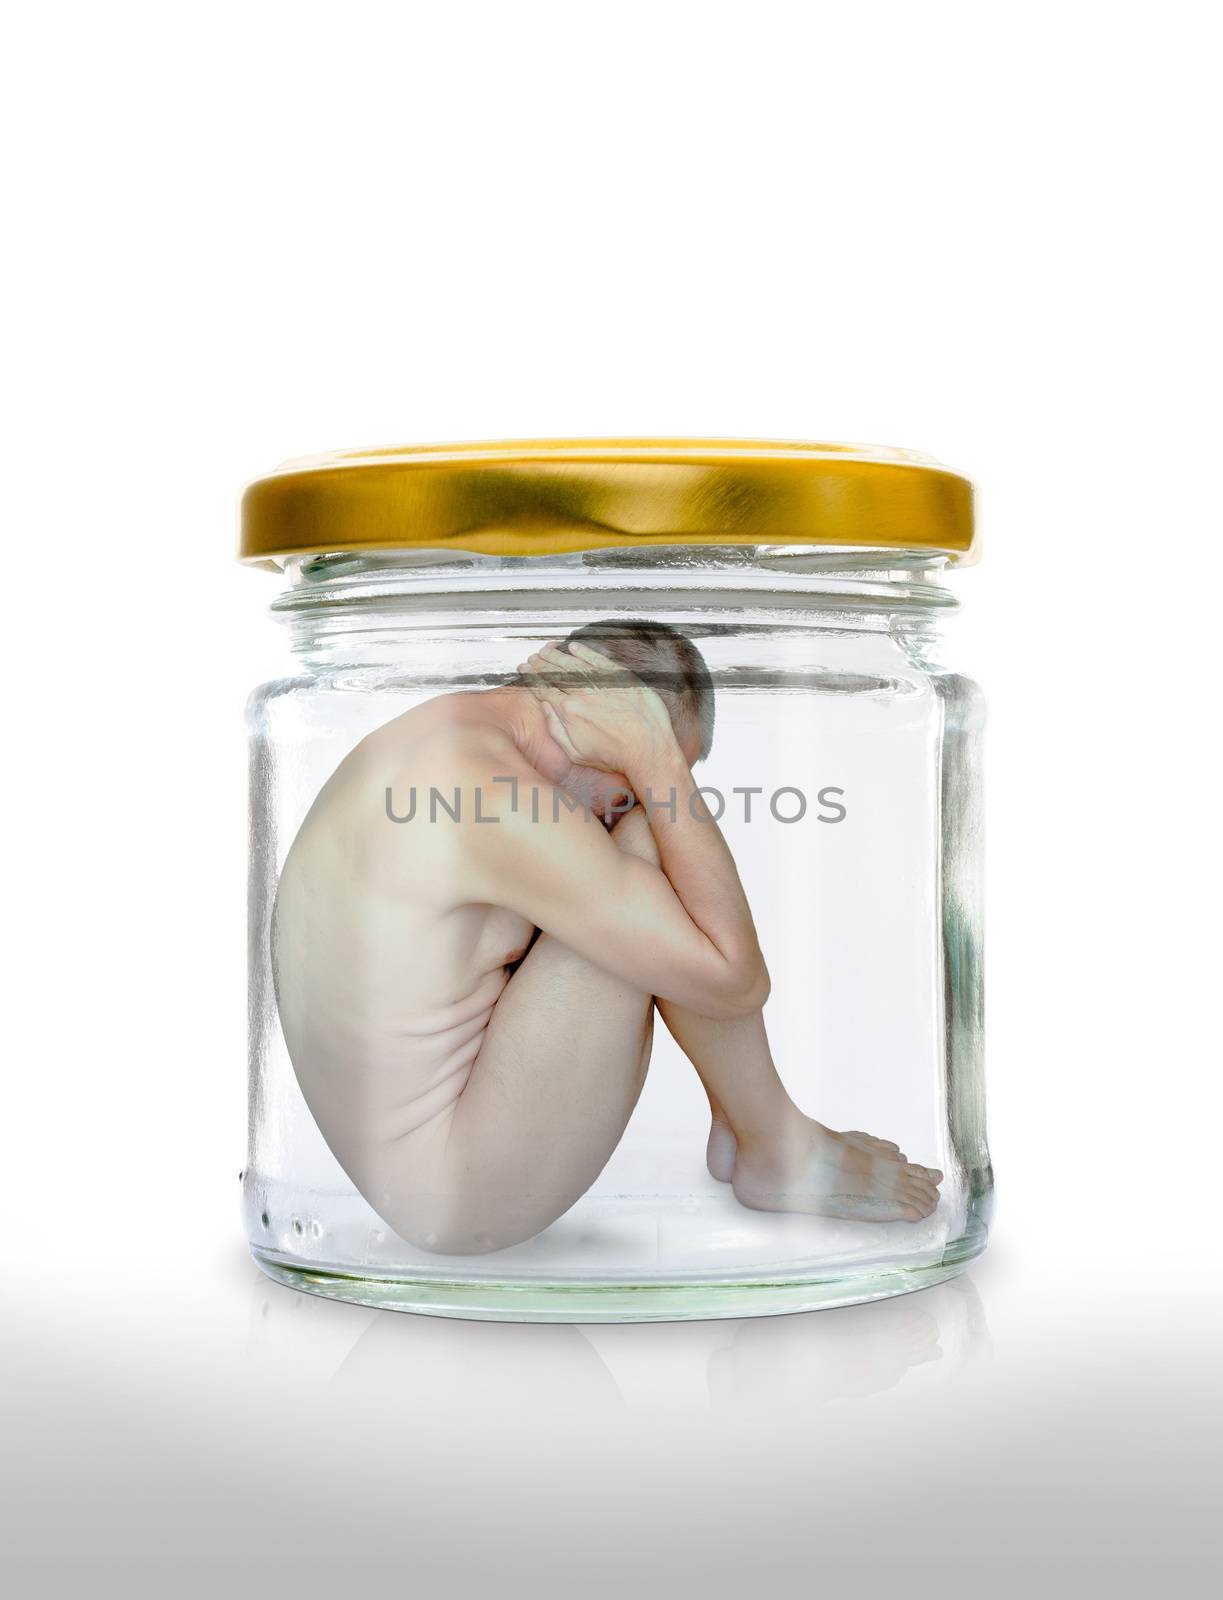 A man trapped in a glass jar  with the closed gold color lid